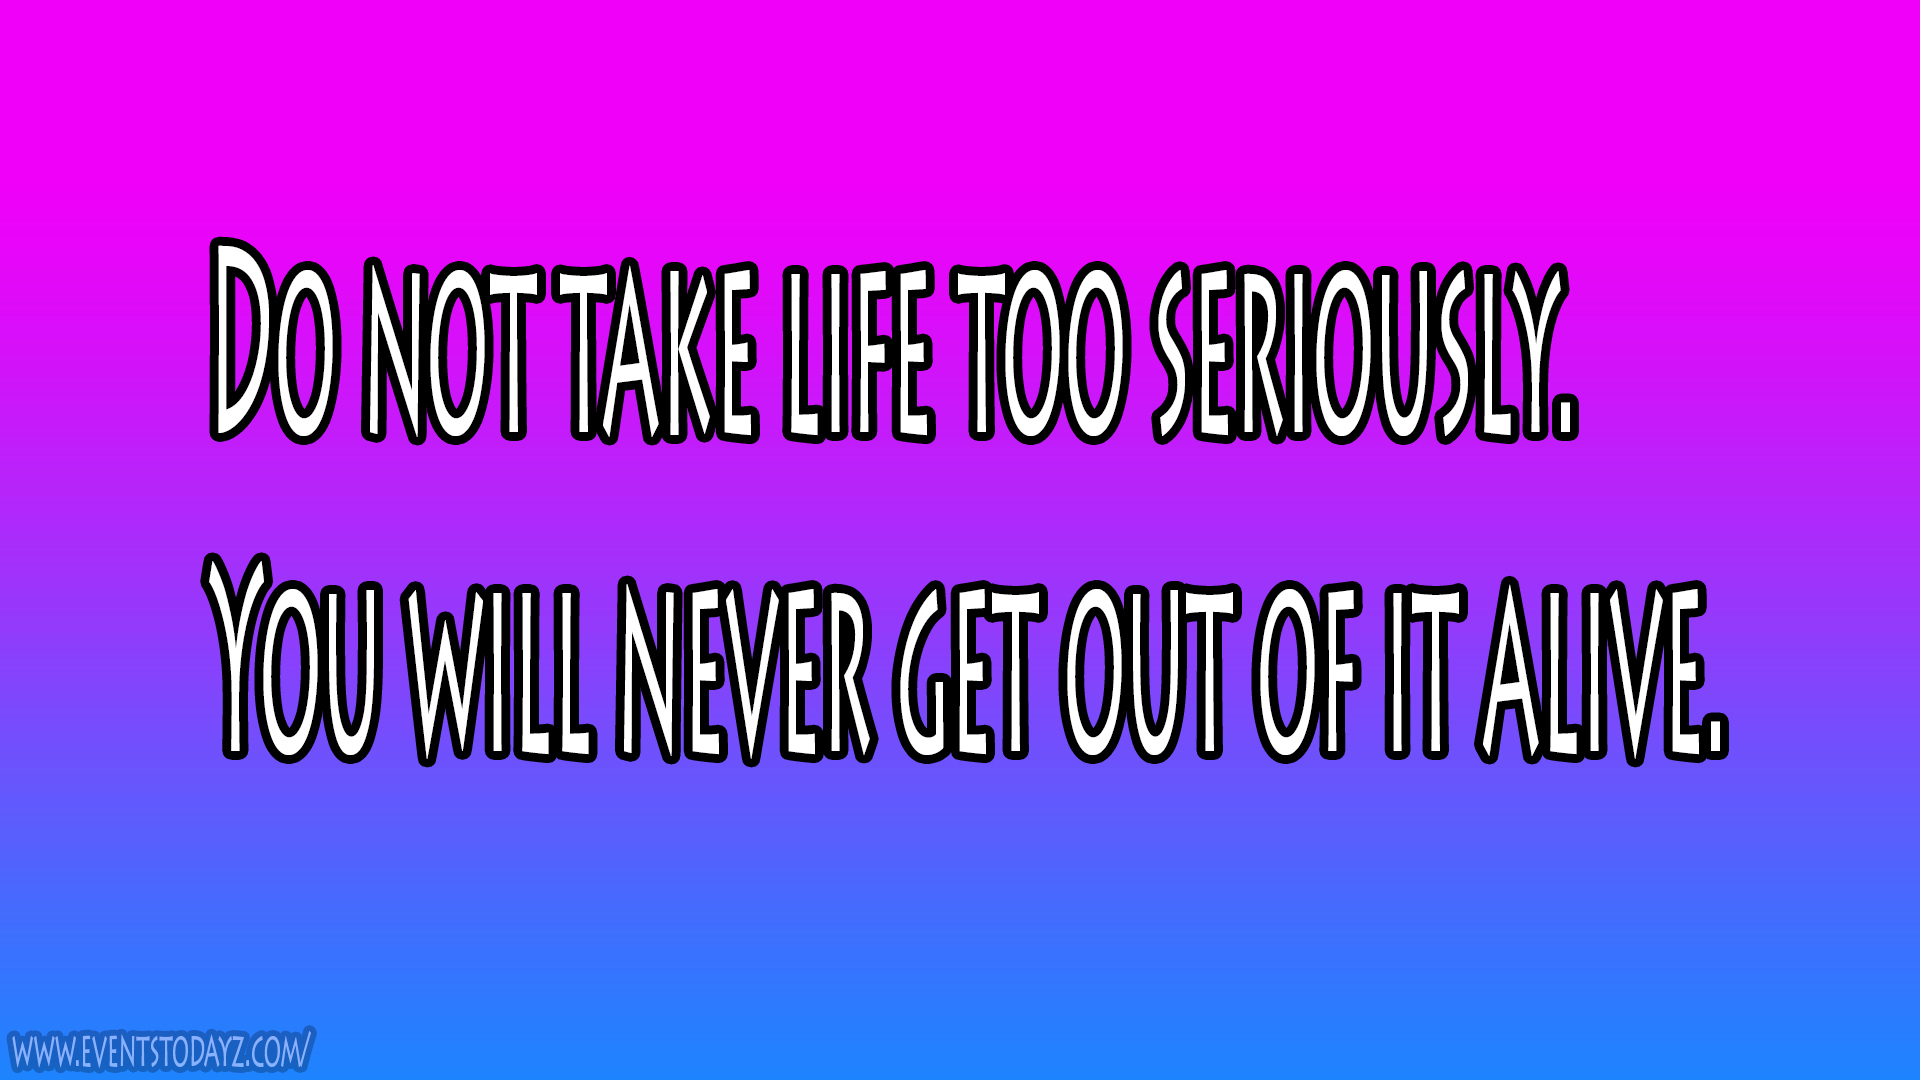 Funny quotes about life | Inspirational sayings